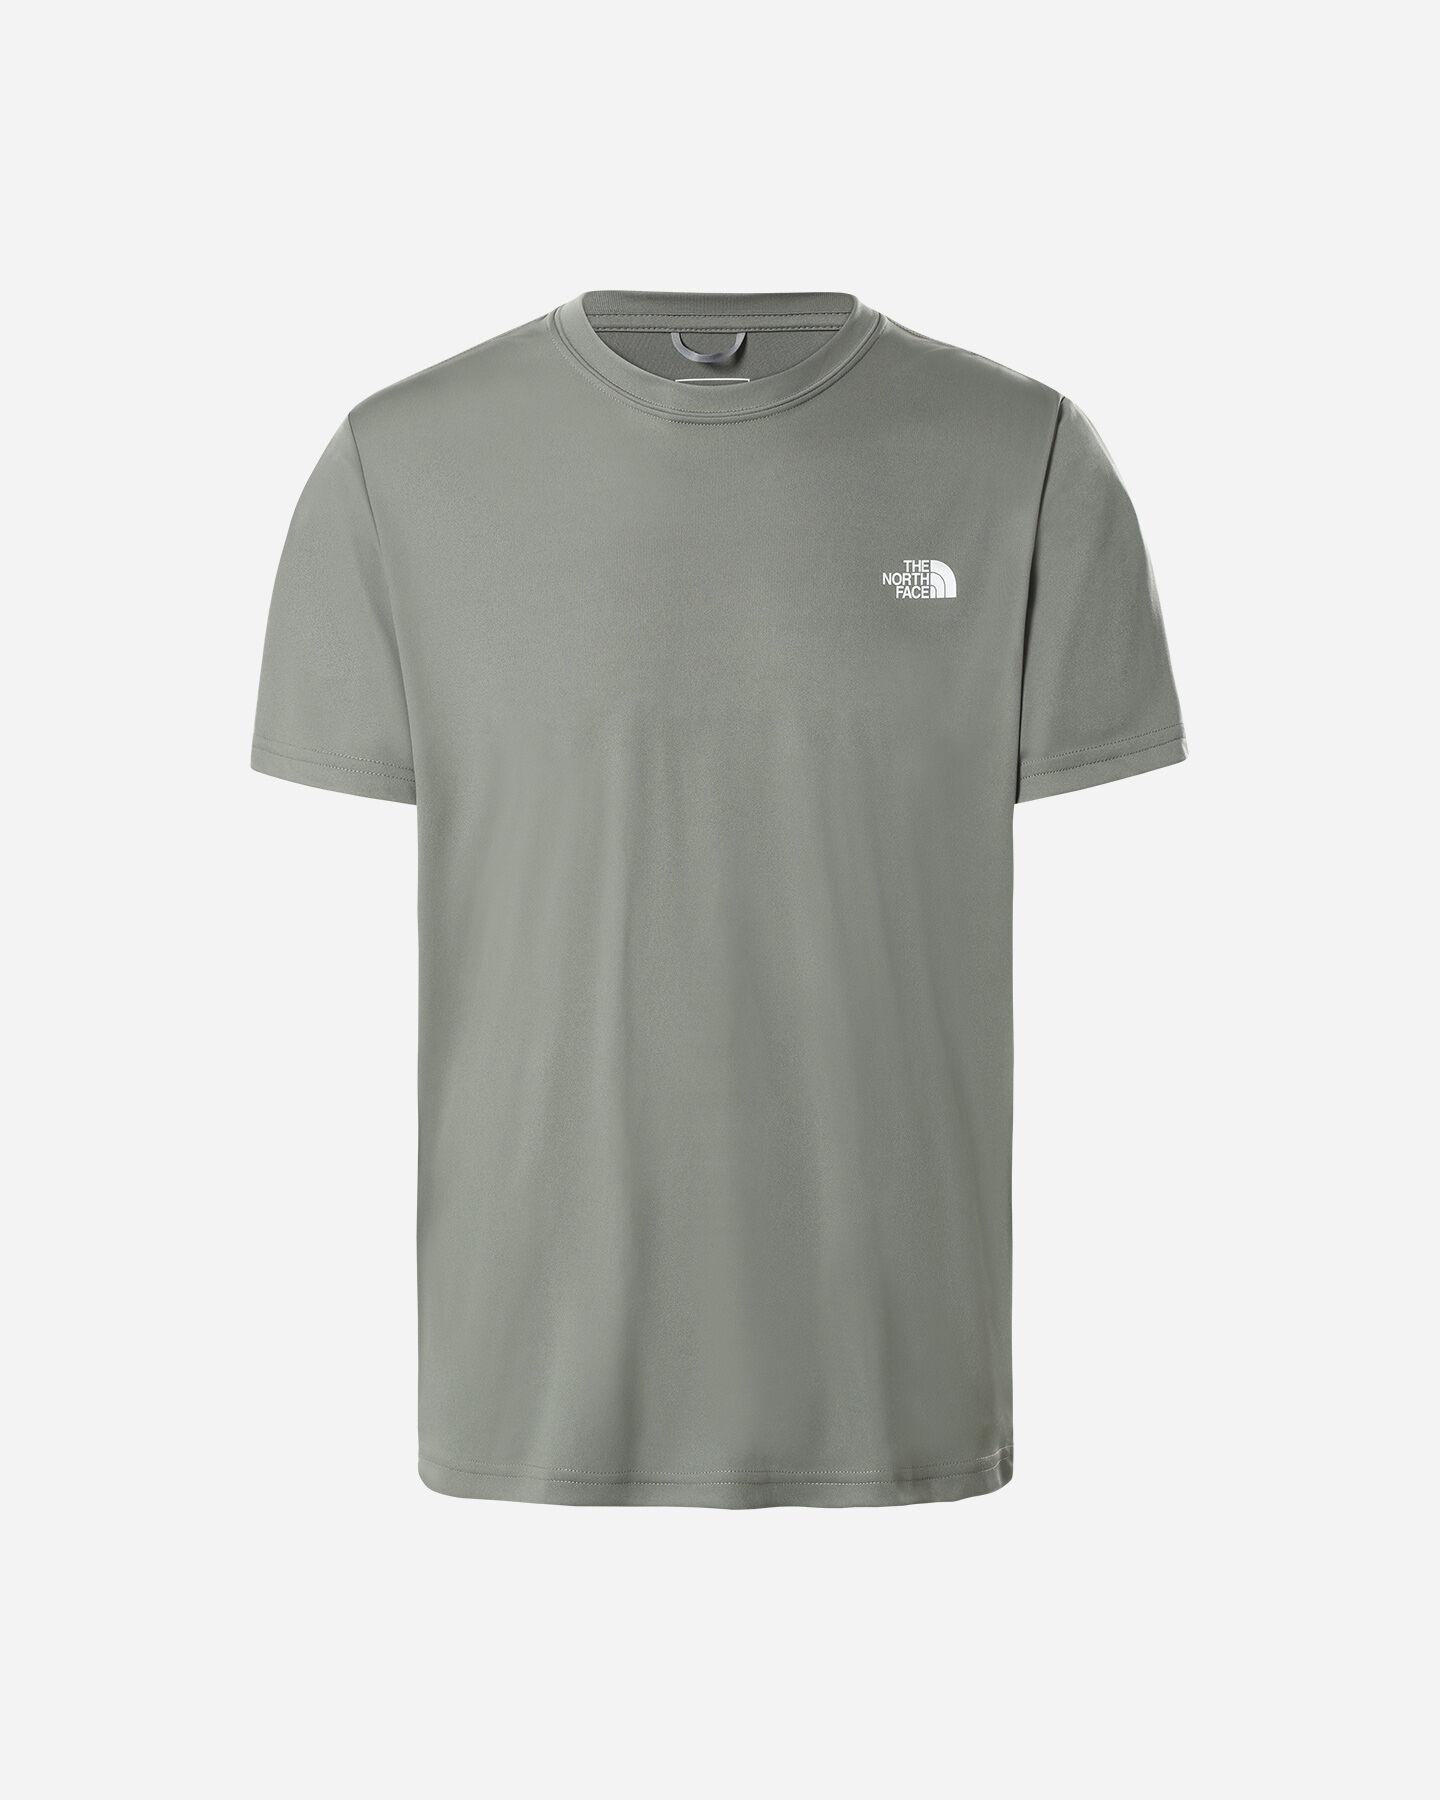  T-Shirt THE NORTH FACE REAXION AMP EU M S5292476|V38|S scatto 0